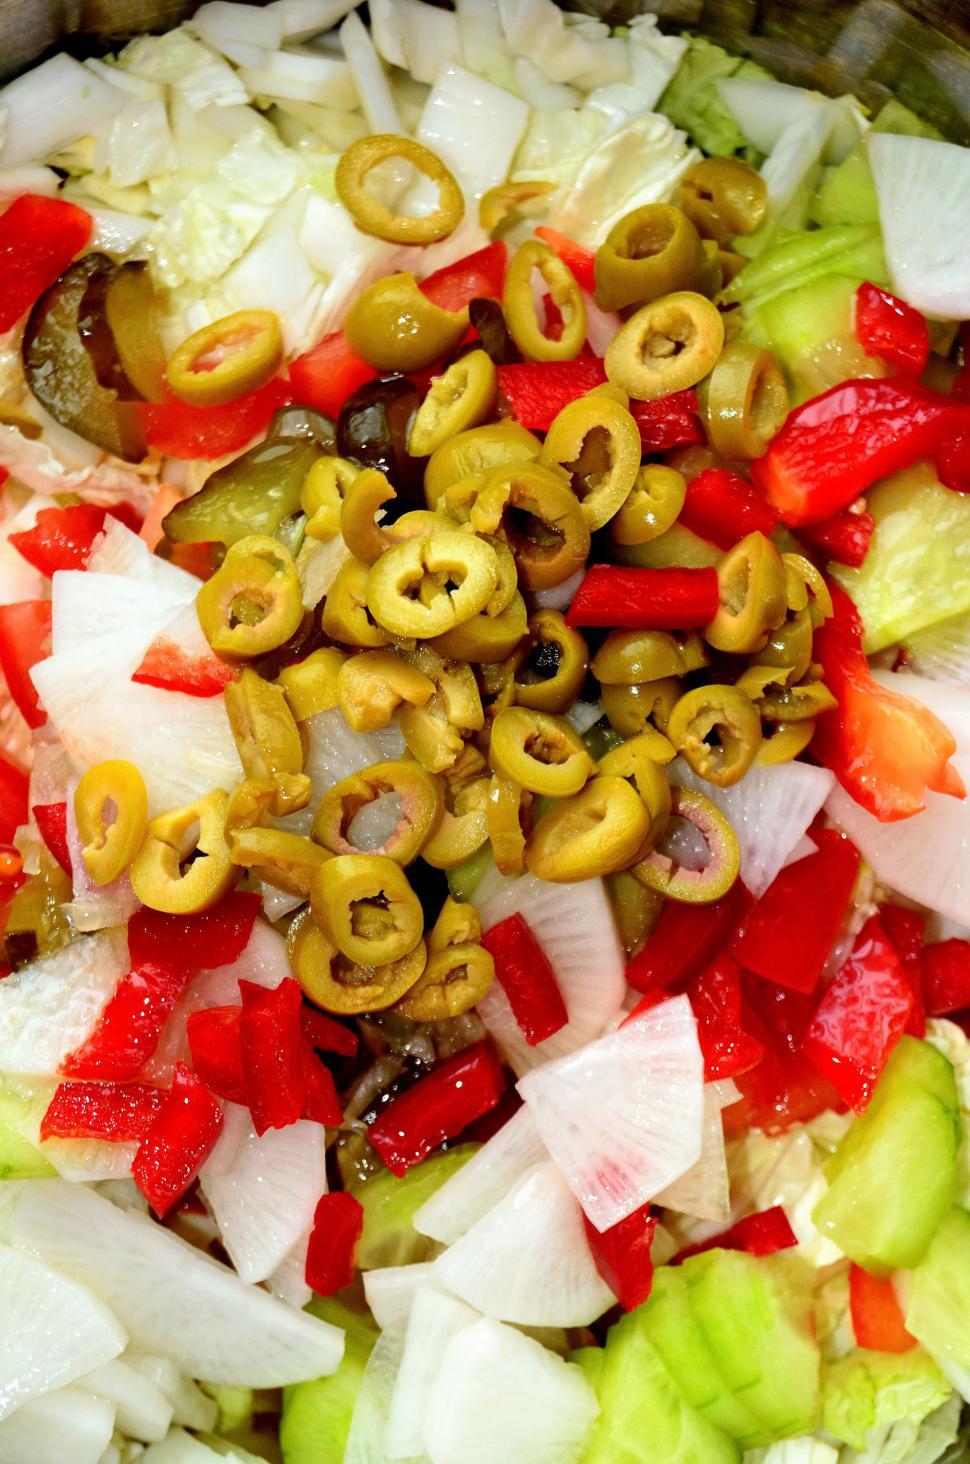 Free Image of Fresh Salad With Onions, Peppers, and Vegetables 